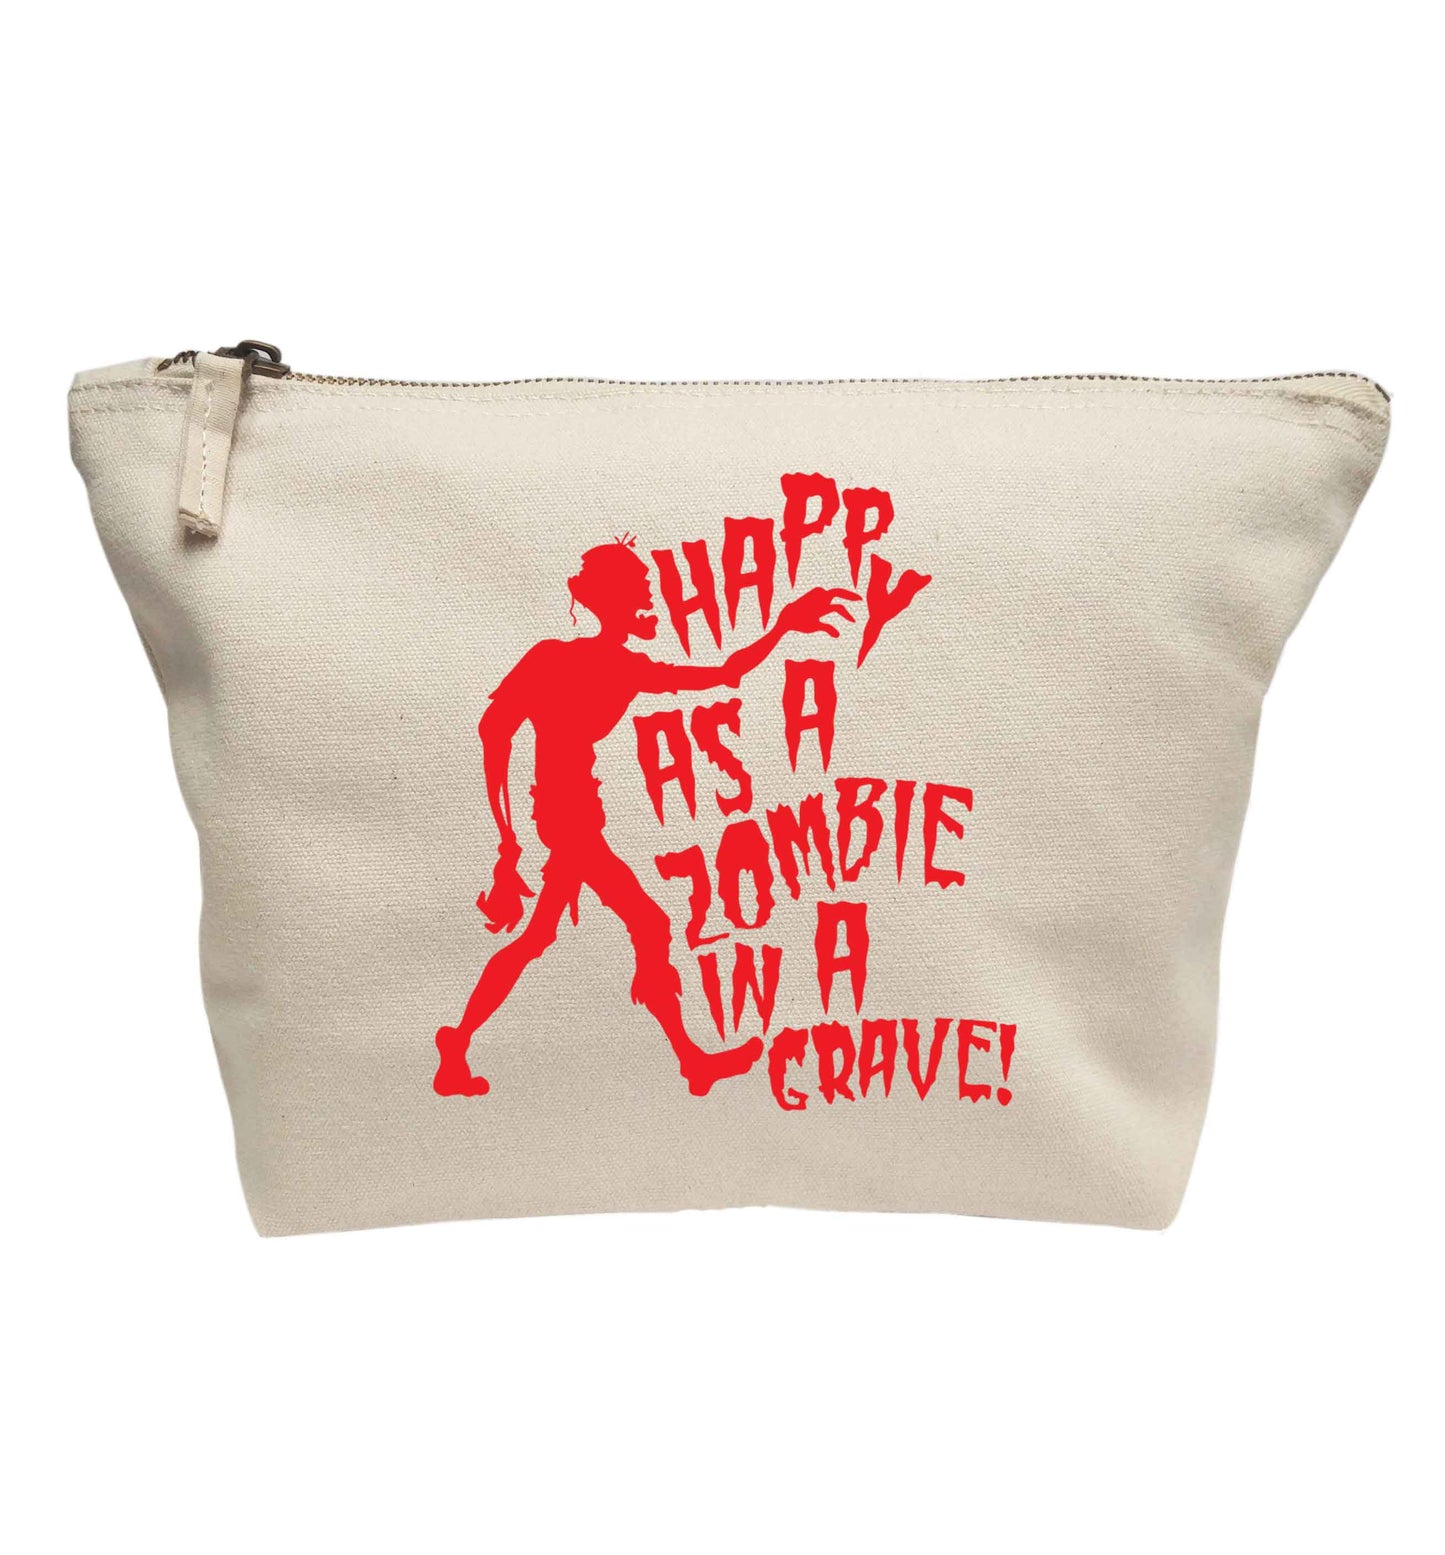 Happy as a zombie in a grave! | makeup / wash bag